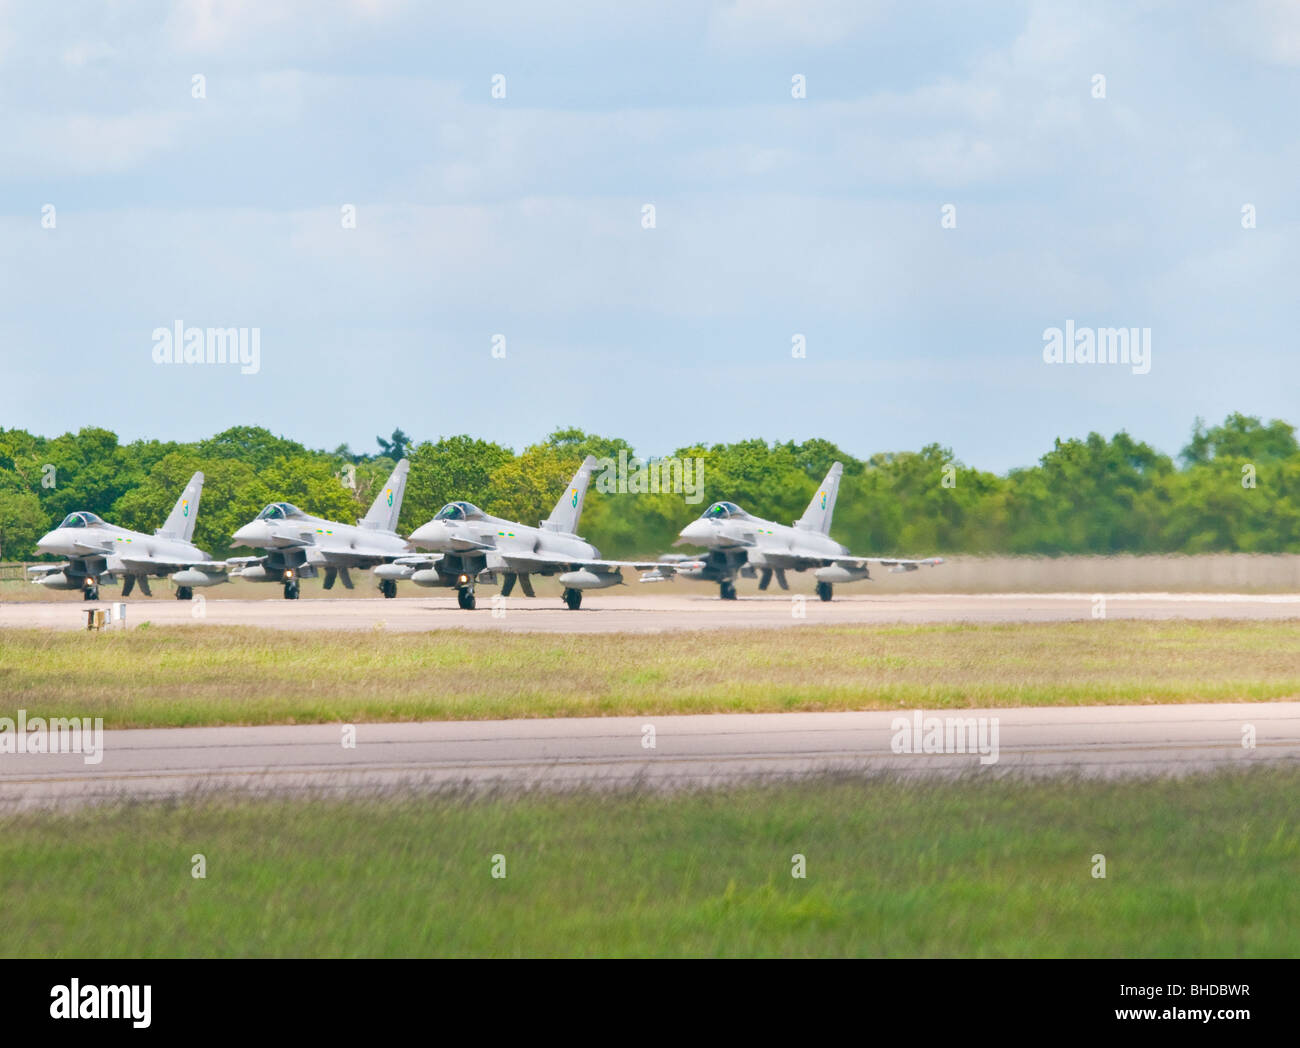 A rare sight of 4 Typhoon fighter jet aircraft lined up side by side ready for takeoff on the main runway at RAF Conningsby Stock Photo